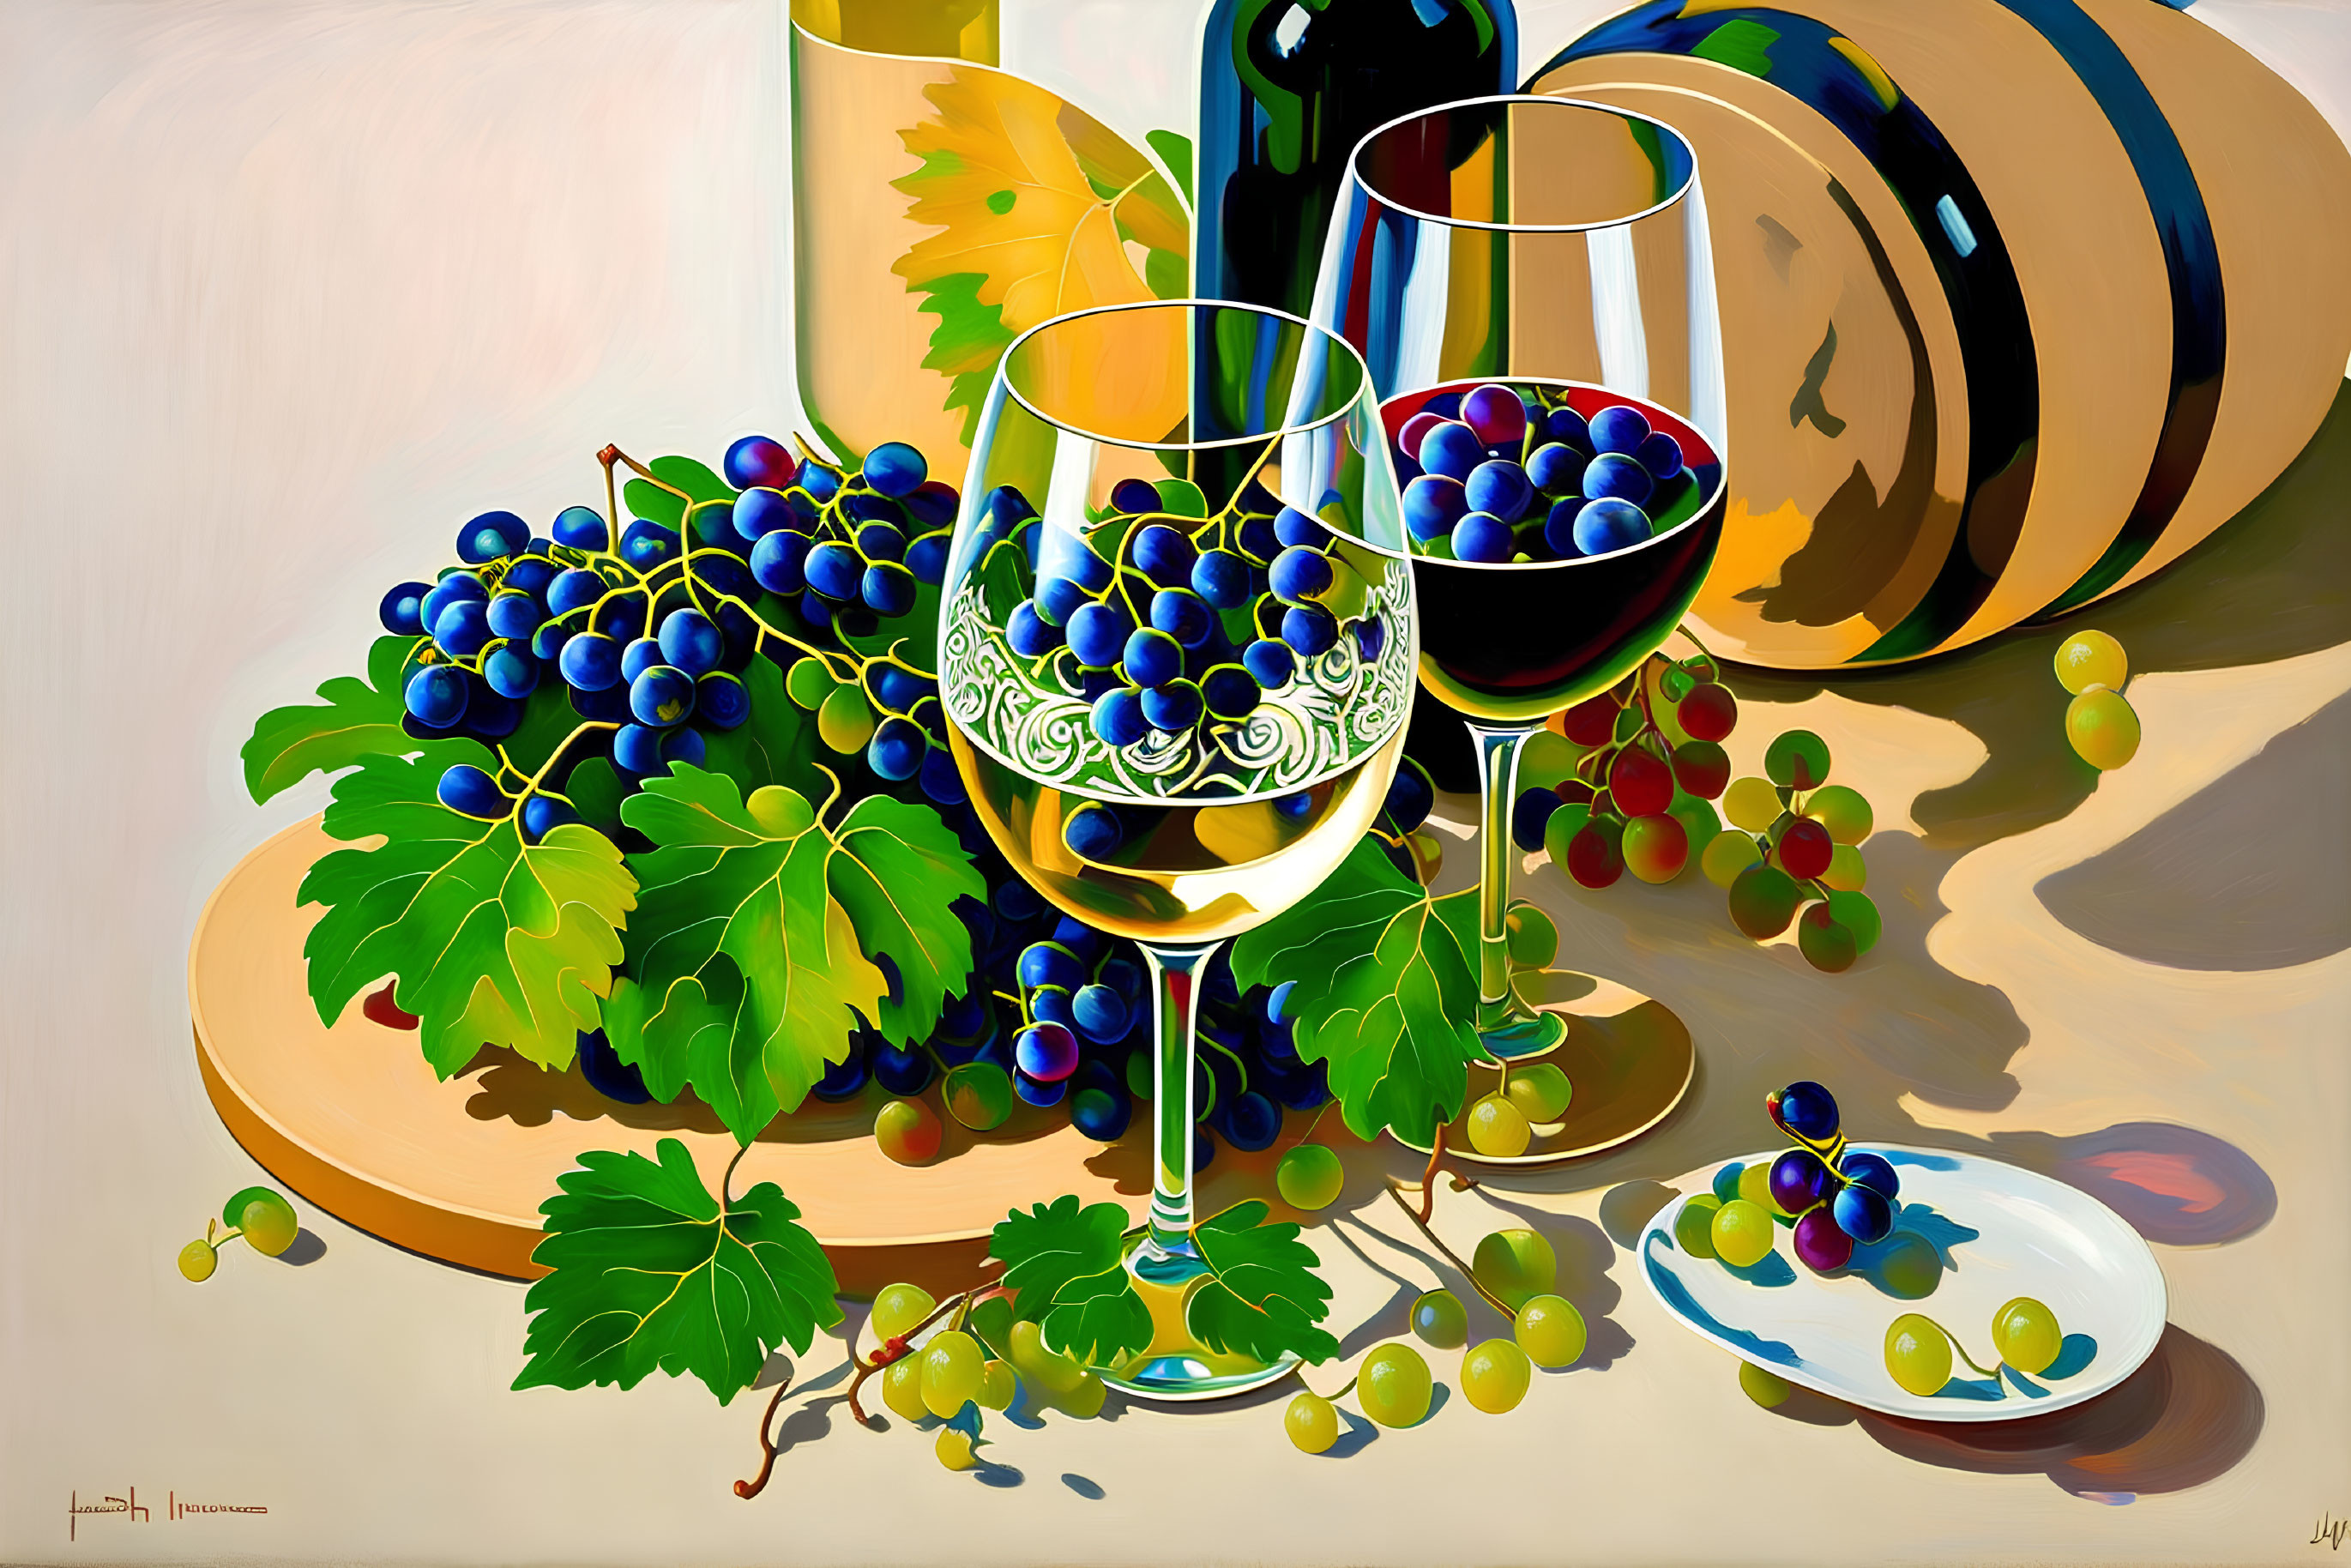 Colorful Still-Life Painting with Wine Barrel, Glasses, Grapes, and Bottle